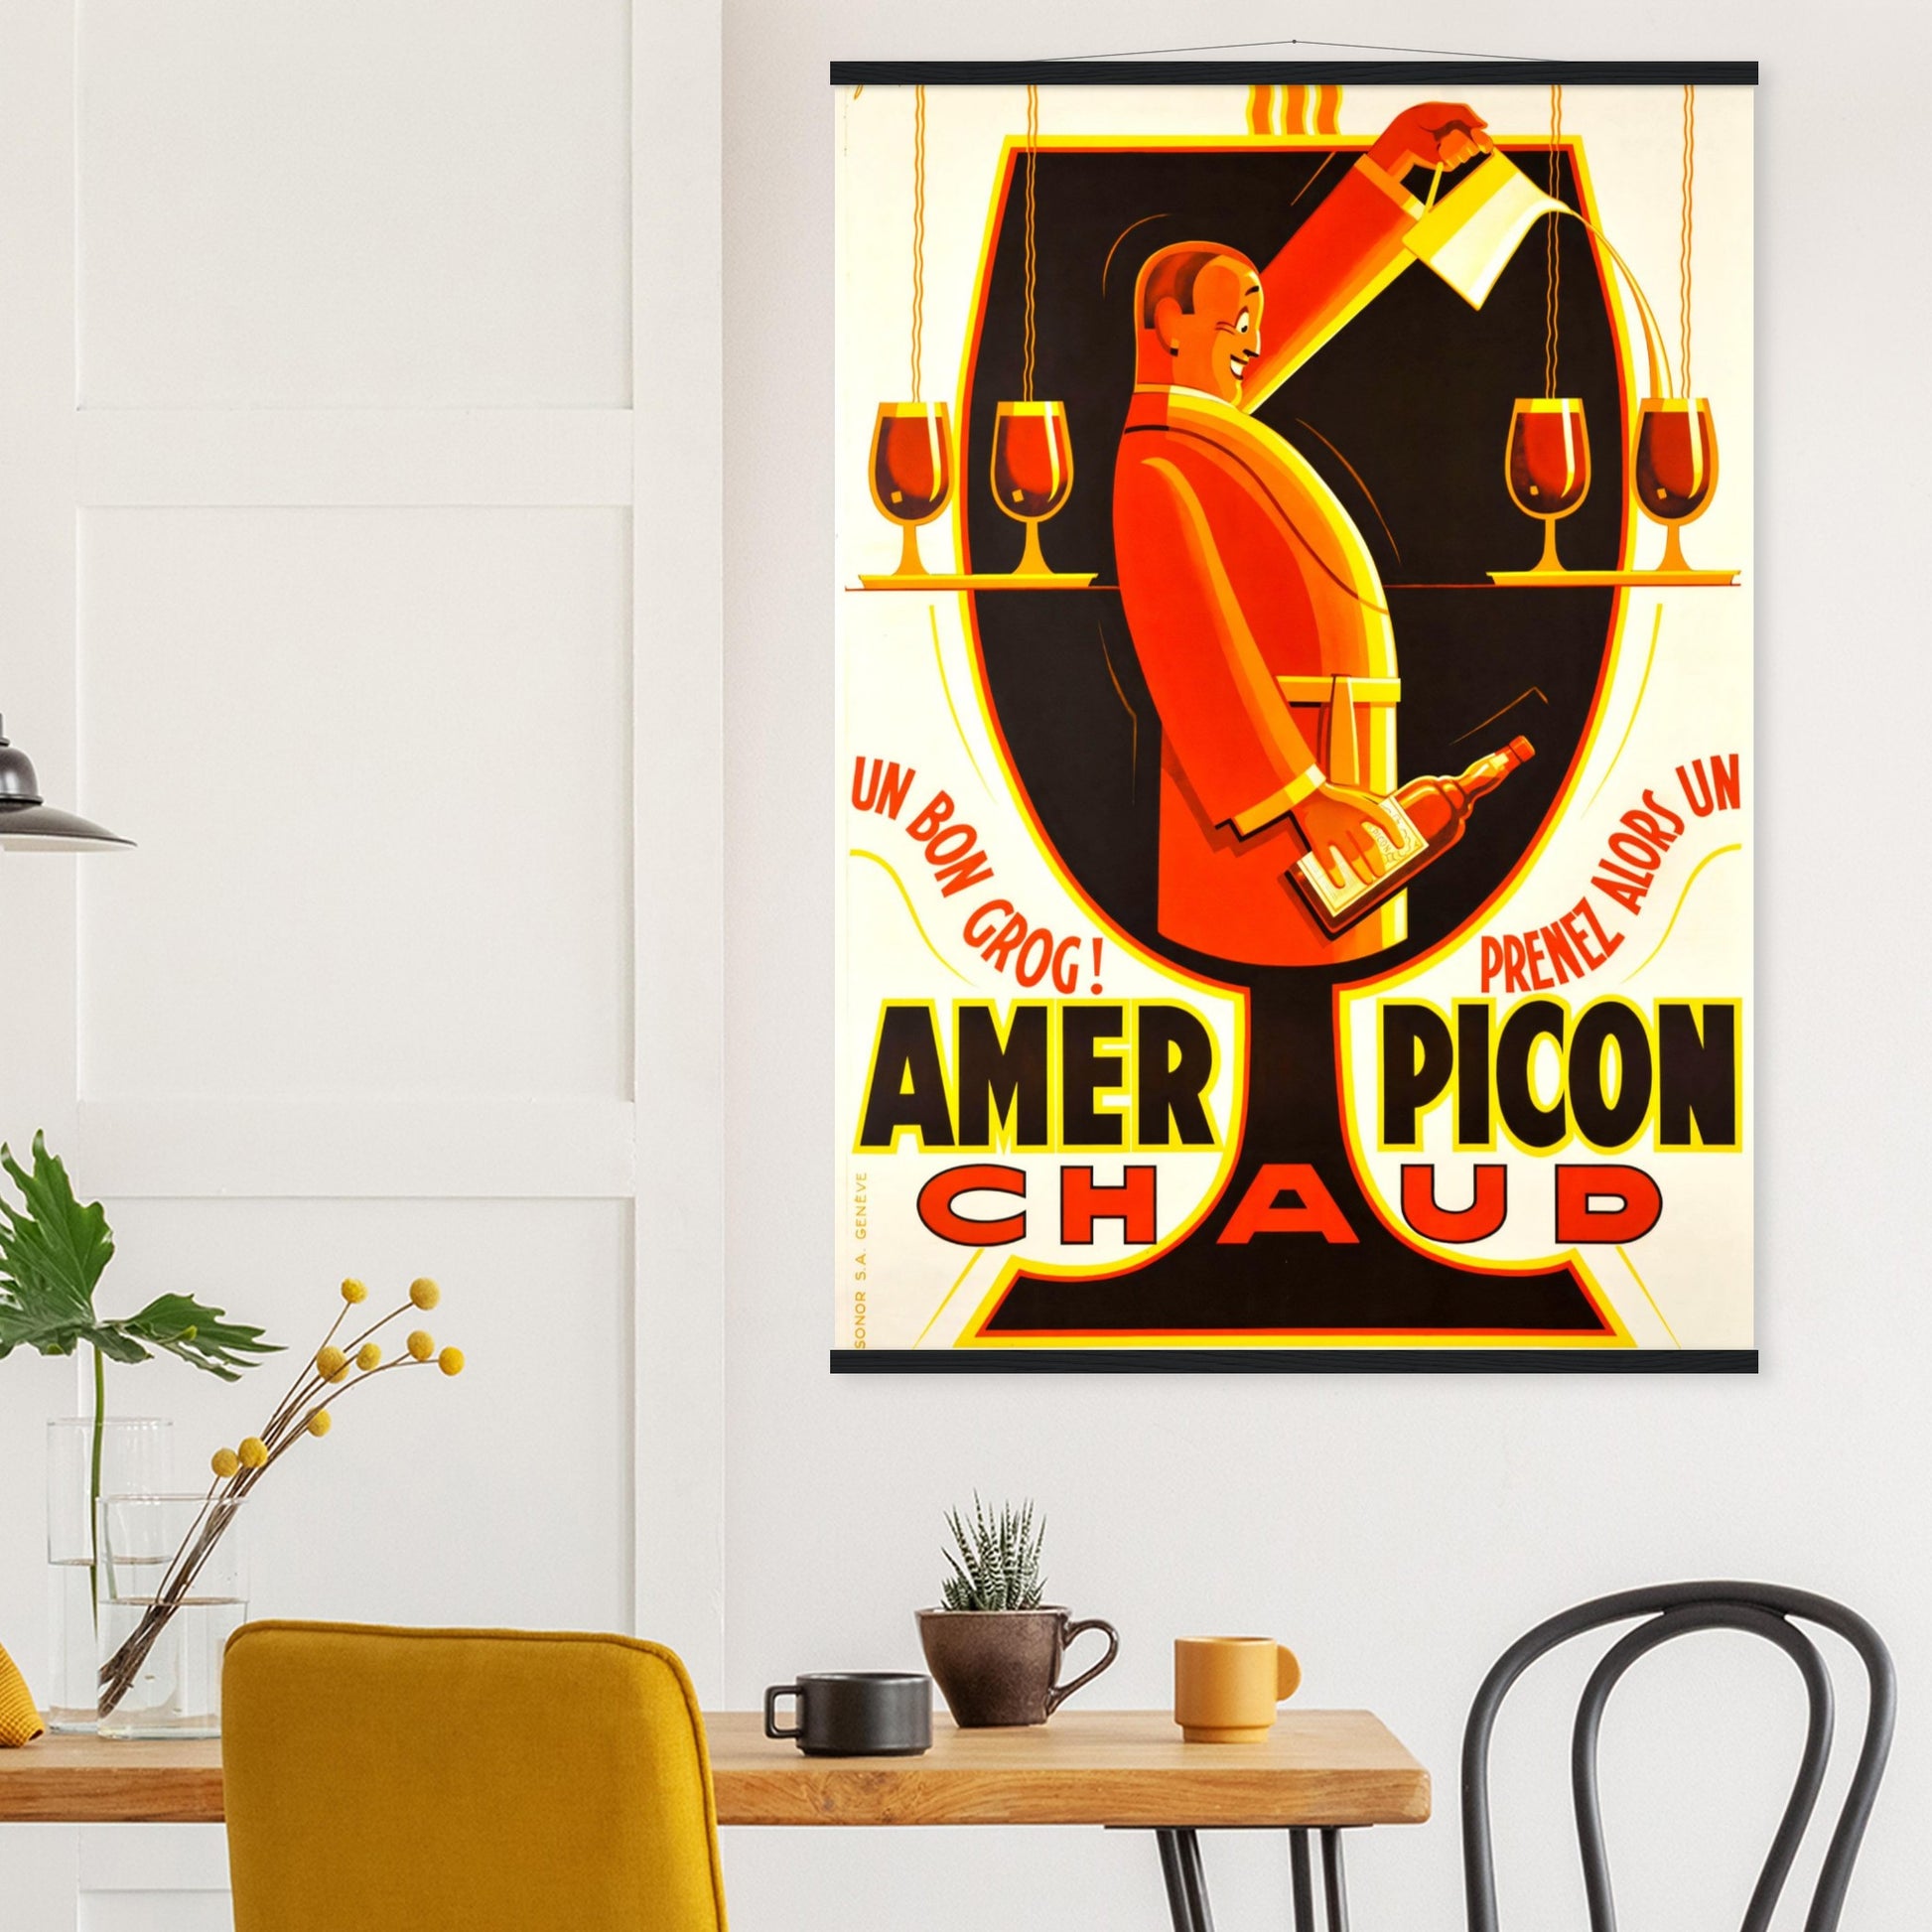 Vintage Poster Reprint, Amer Picard, Wall Art on Premium Paper - Posterify